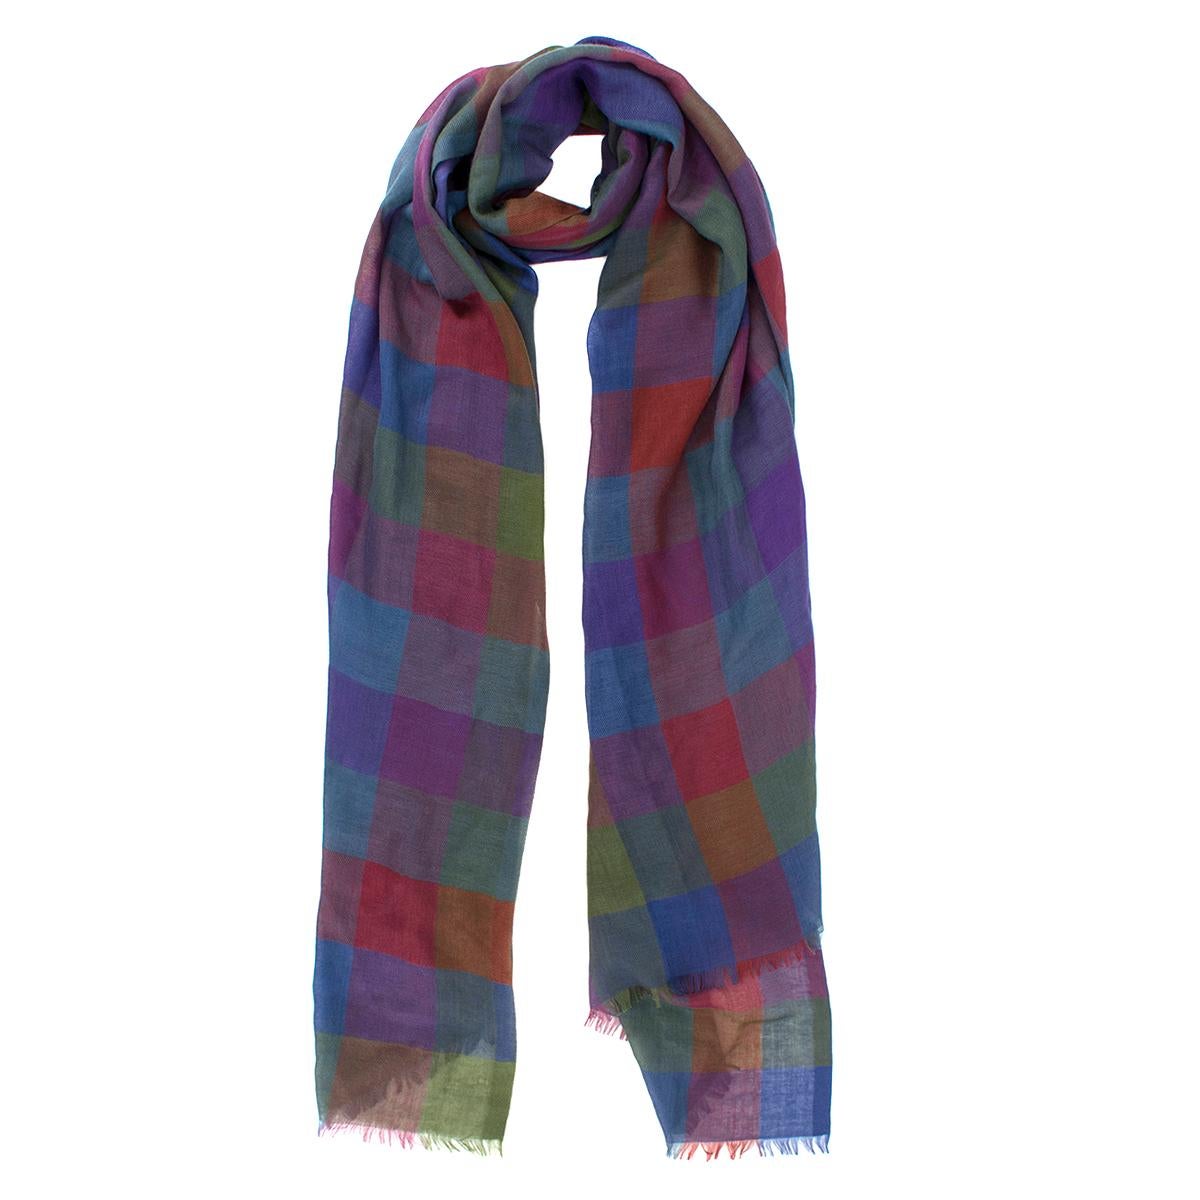 Loro Piana Cashmere & Silk-blend Checked Print Scarf

- Multi-coloured, cashmere & silk-blend scarf
- Check pattern
- Lightweight
- Frill trim edges 
- 70% cashmere and 30% silk.

Please note, these items are pre-owned and may show some signs of